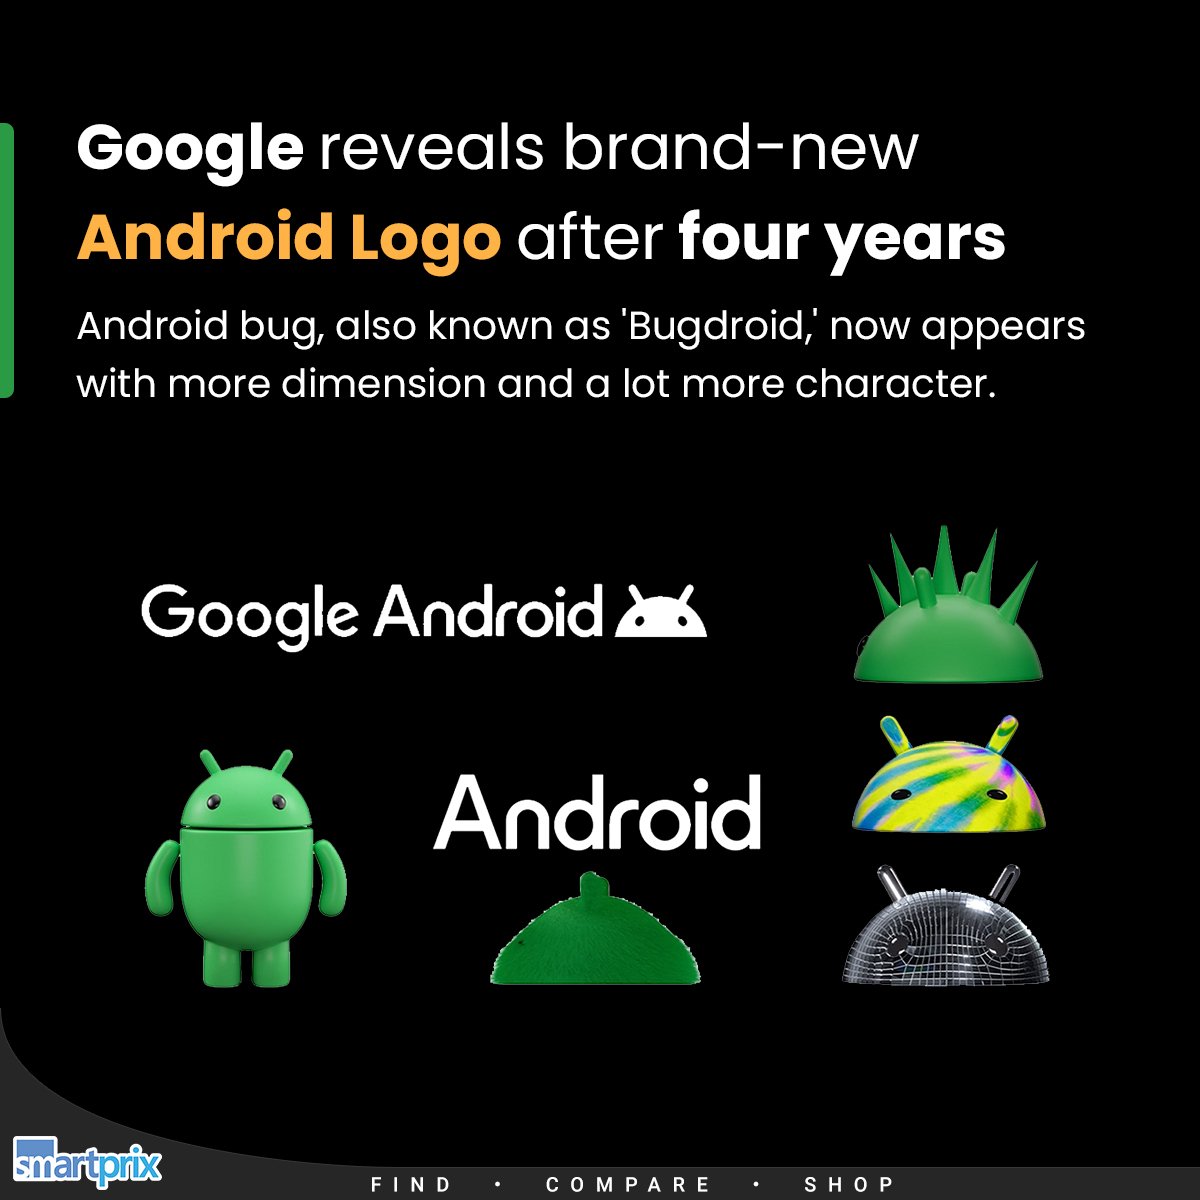 Smartprix on X: Google's Android logo gets a new look and a 3D